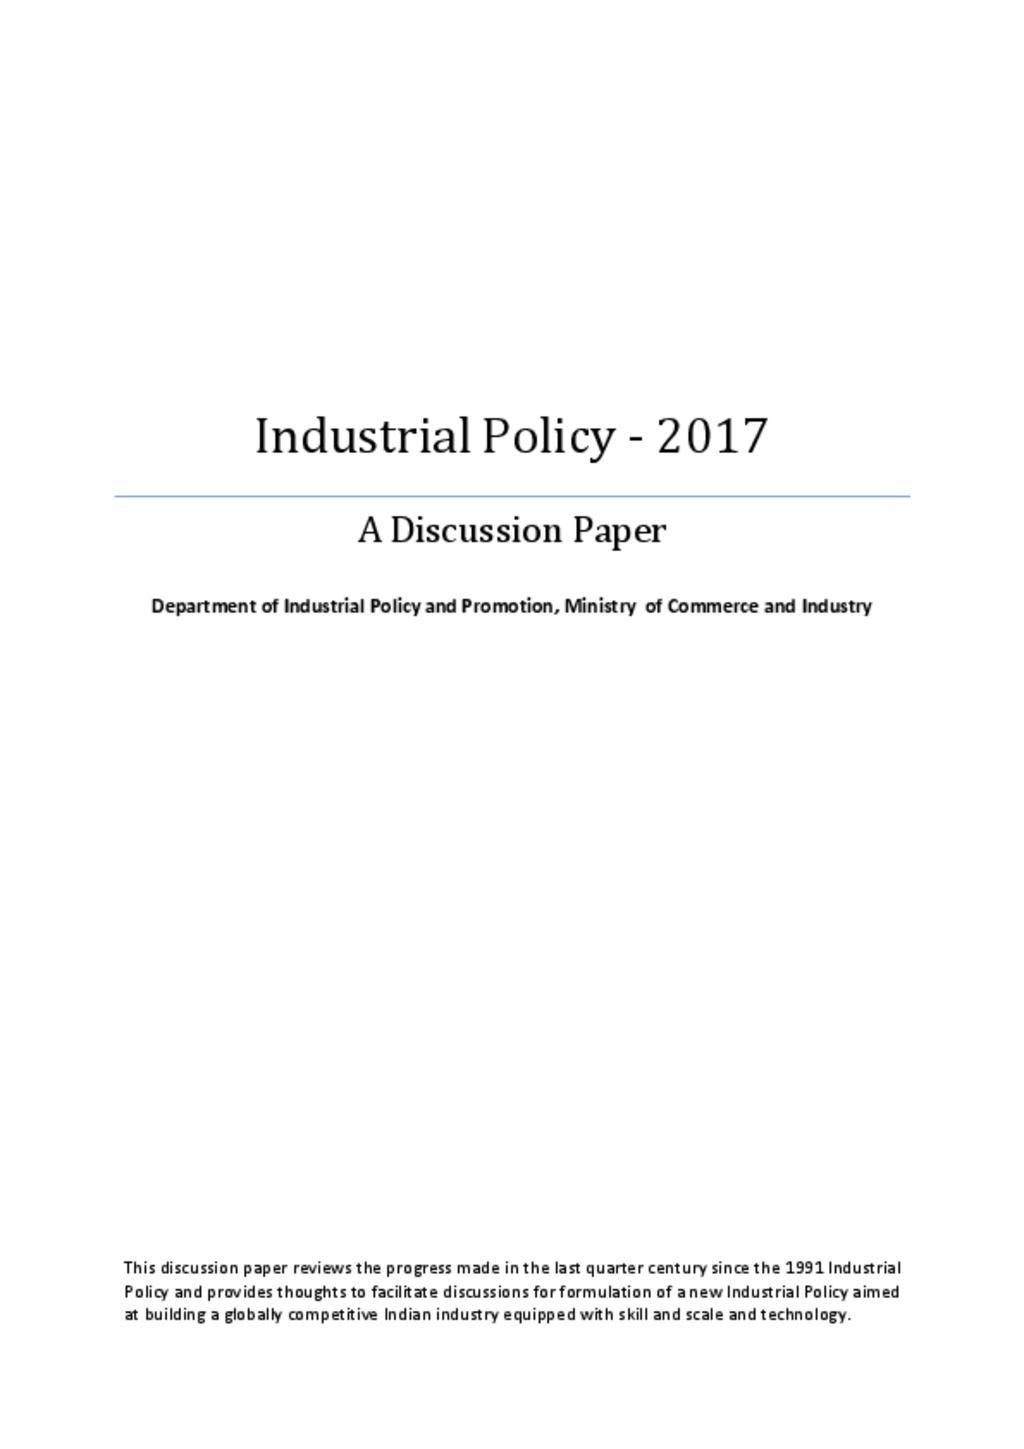 industrial Policy discussion paper 2017